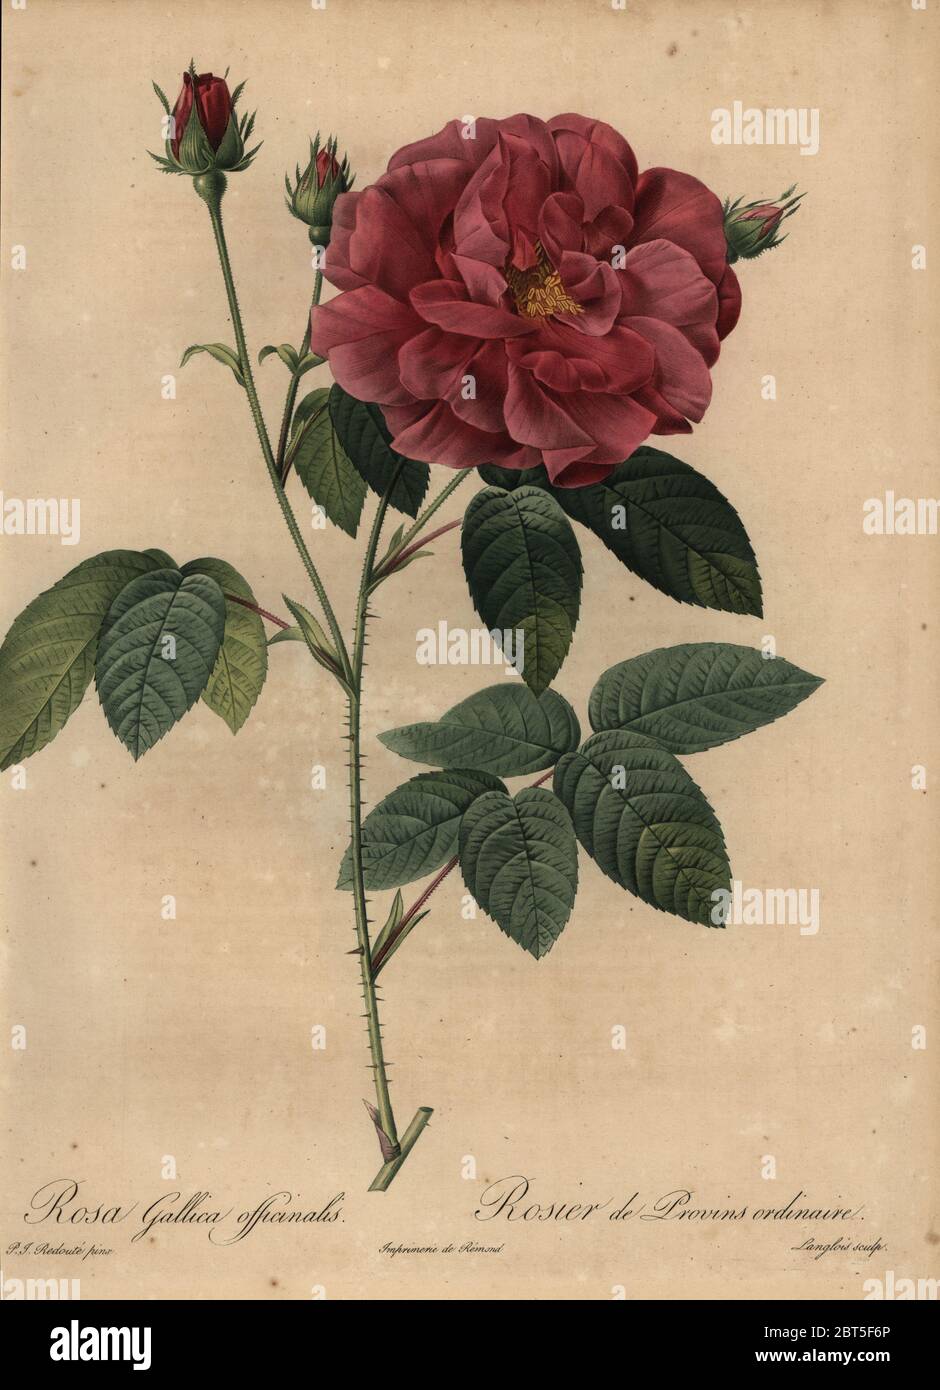 Crimson French rose or rose of Provins, Rosa gallica officinalis, Rosier de Provins ordinaire. Stipple copperplate engraving by Pierre Gabriel Langlois handcoloured a la poupee after a botanical illustration by Pierre-Joseph Redoute from the first folio edition of Les Roses, Firmin Didot, Paris, 1817. Stock Photo